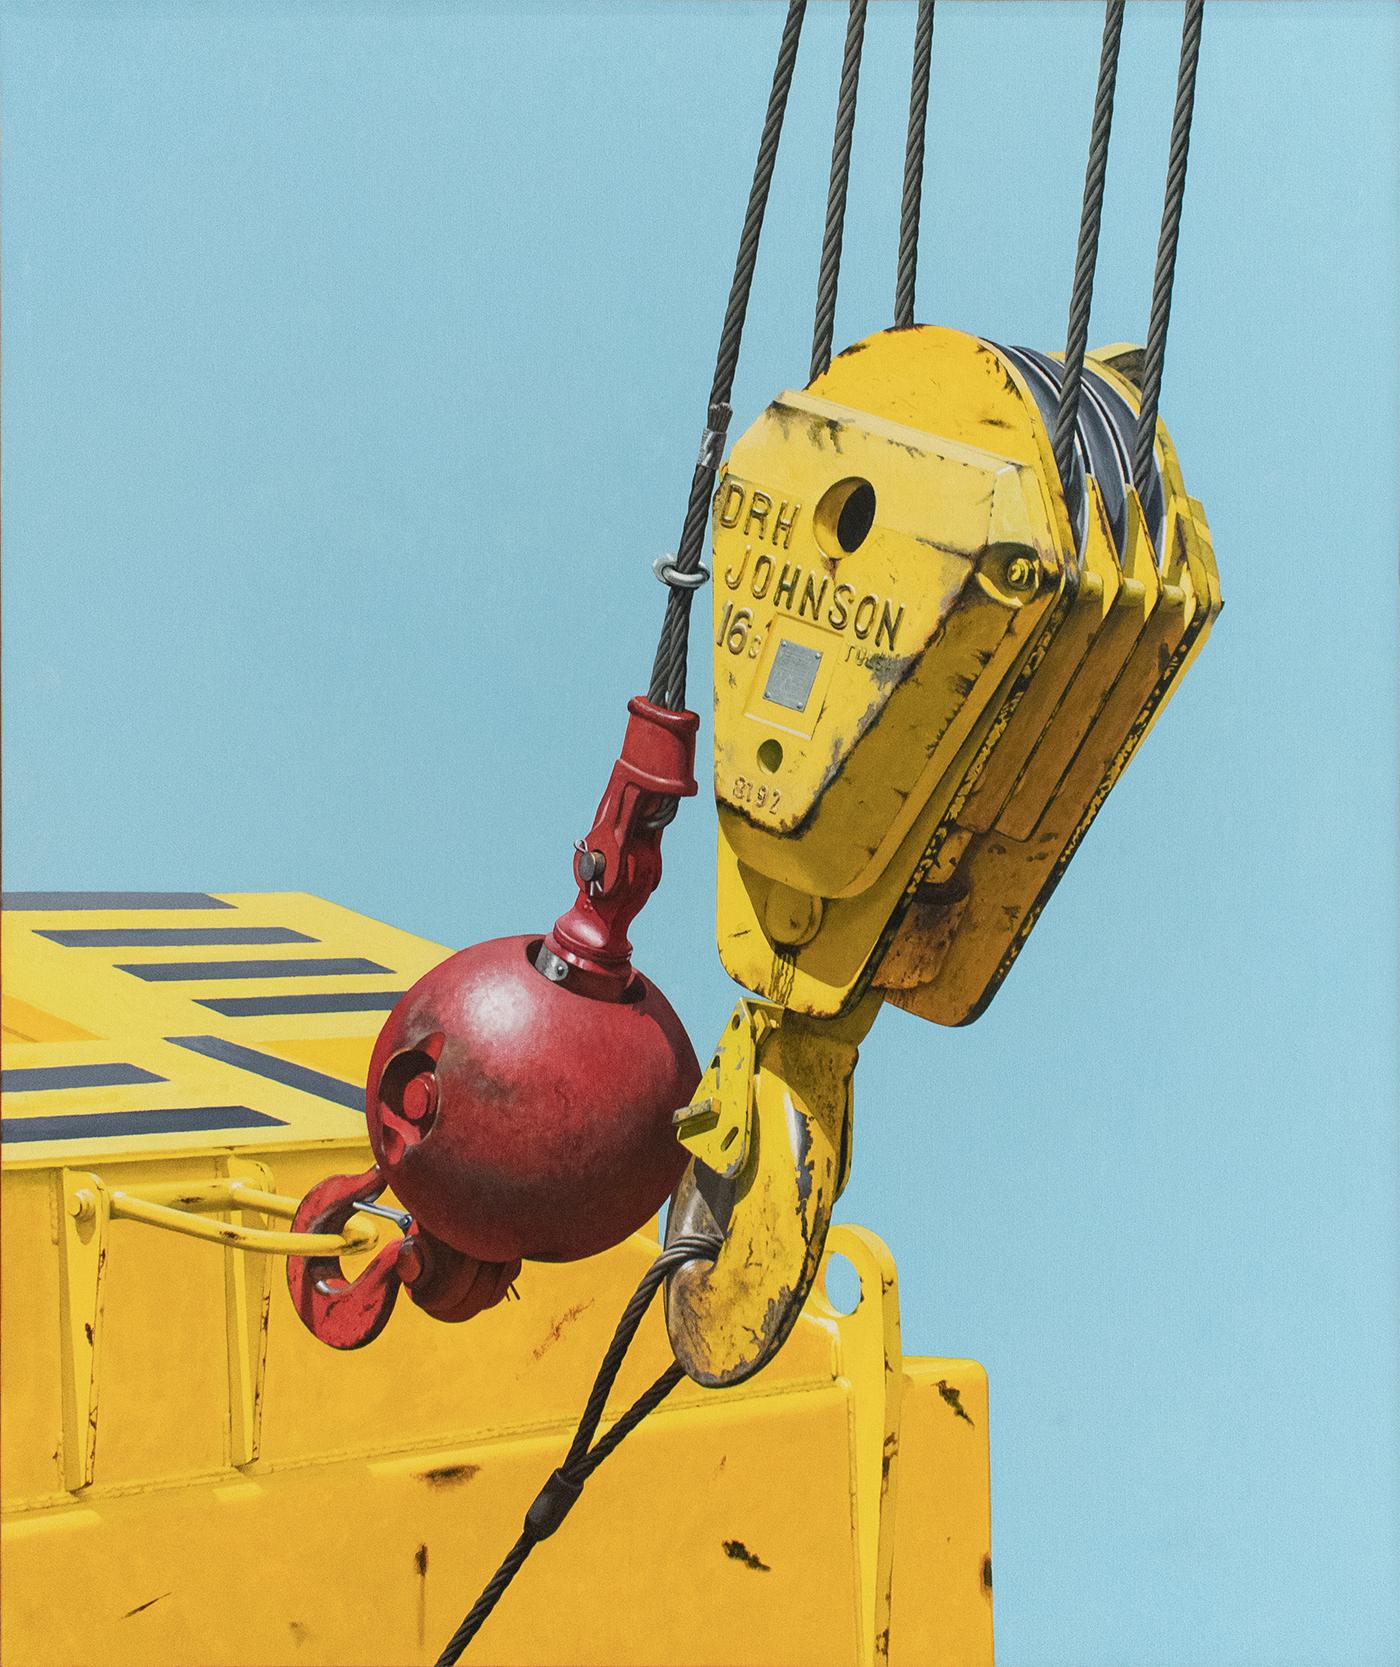 Photo-realist painting of a bright yellow and red industrial ball hook against a sky blue background
49 x 40 x 2 inches
oil on canvas, thin wood stripping
signed Richards in bottom right corner, recto
Painting is wired on reverse for easy